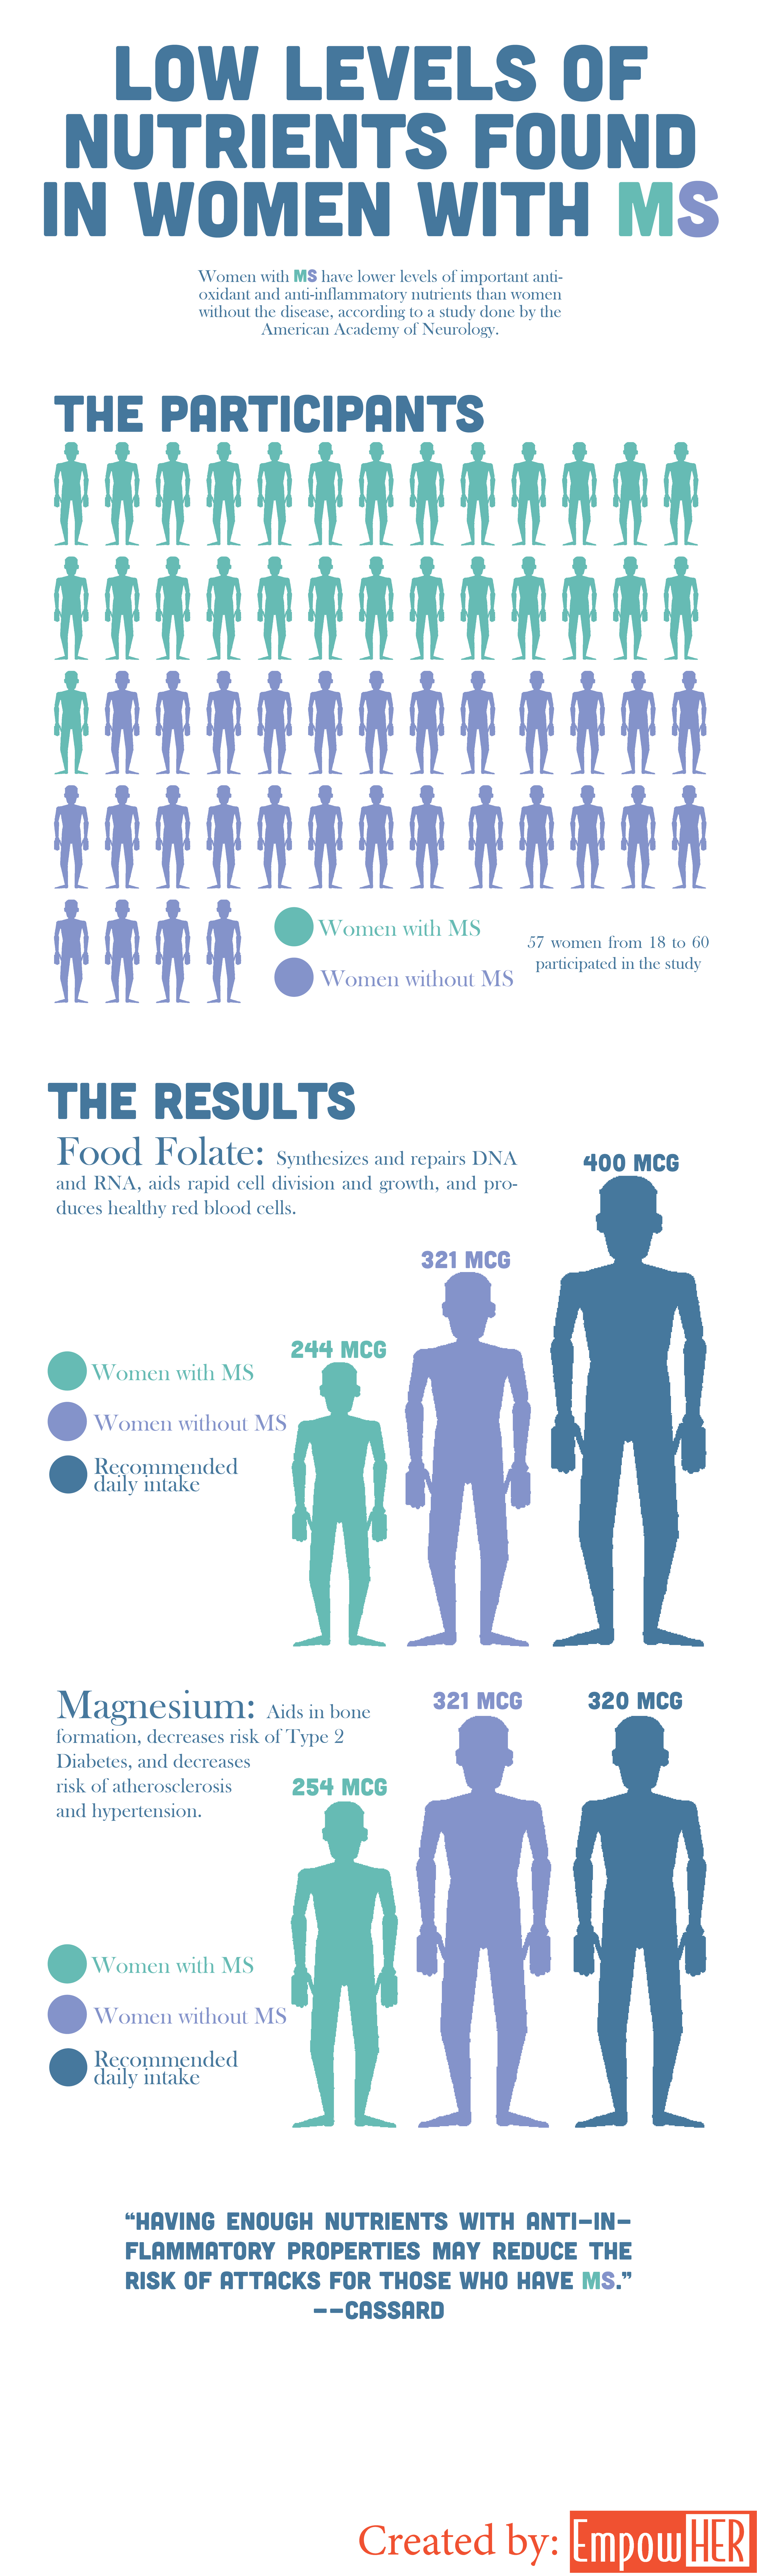 low levels of nutrients in women with MS infographic